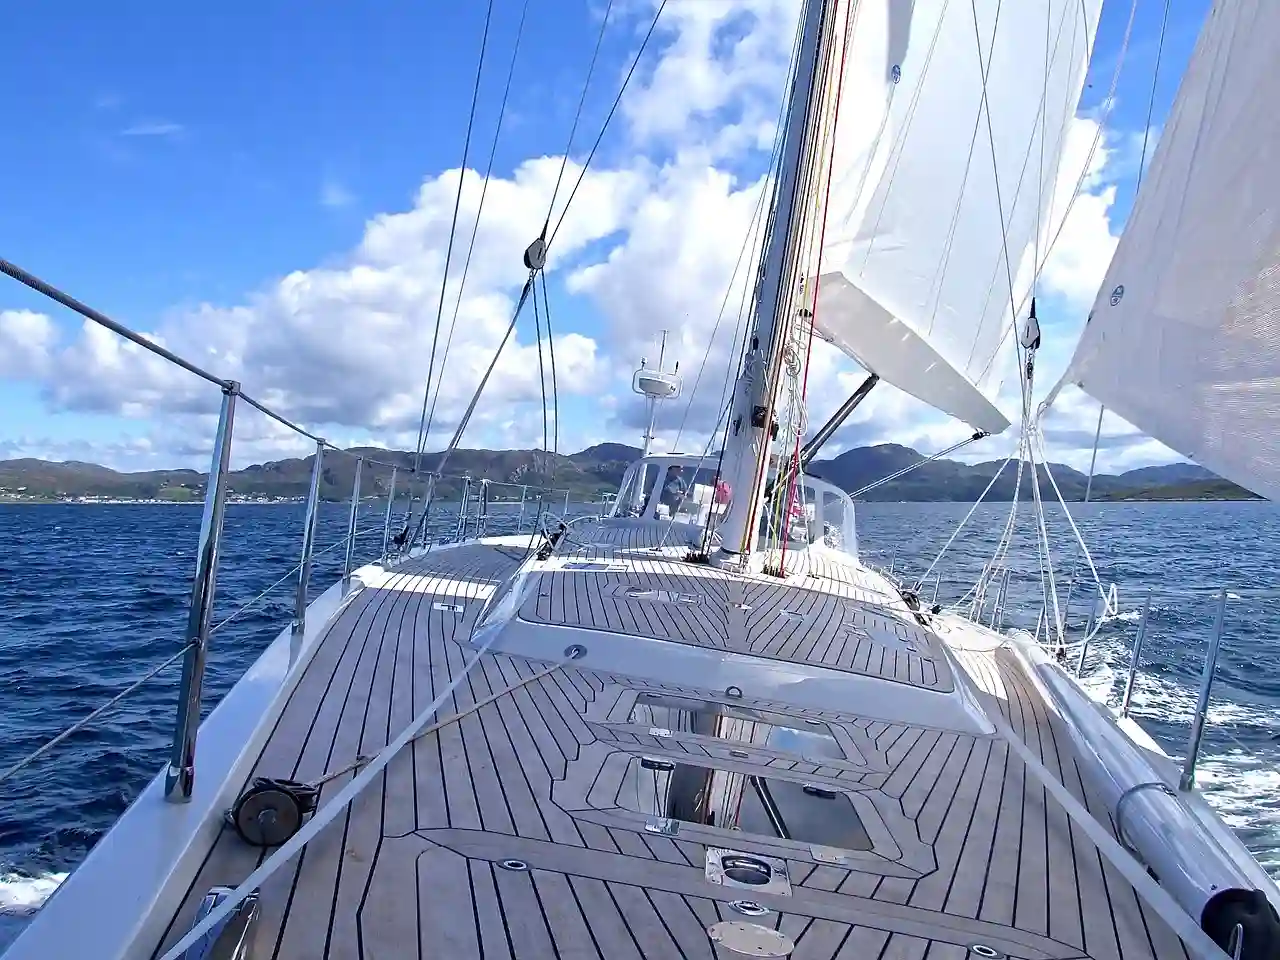 Learn How to Sail in 15 Minutes